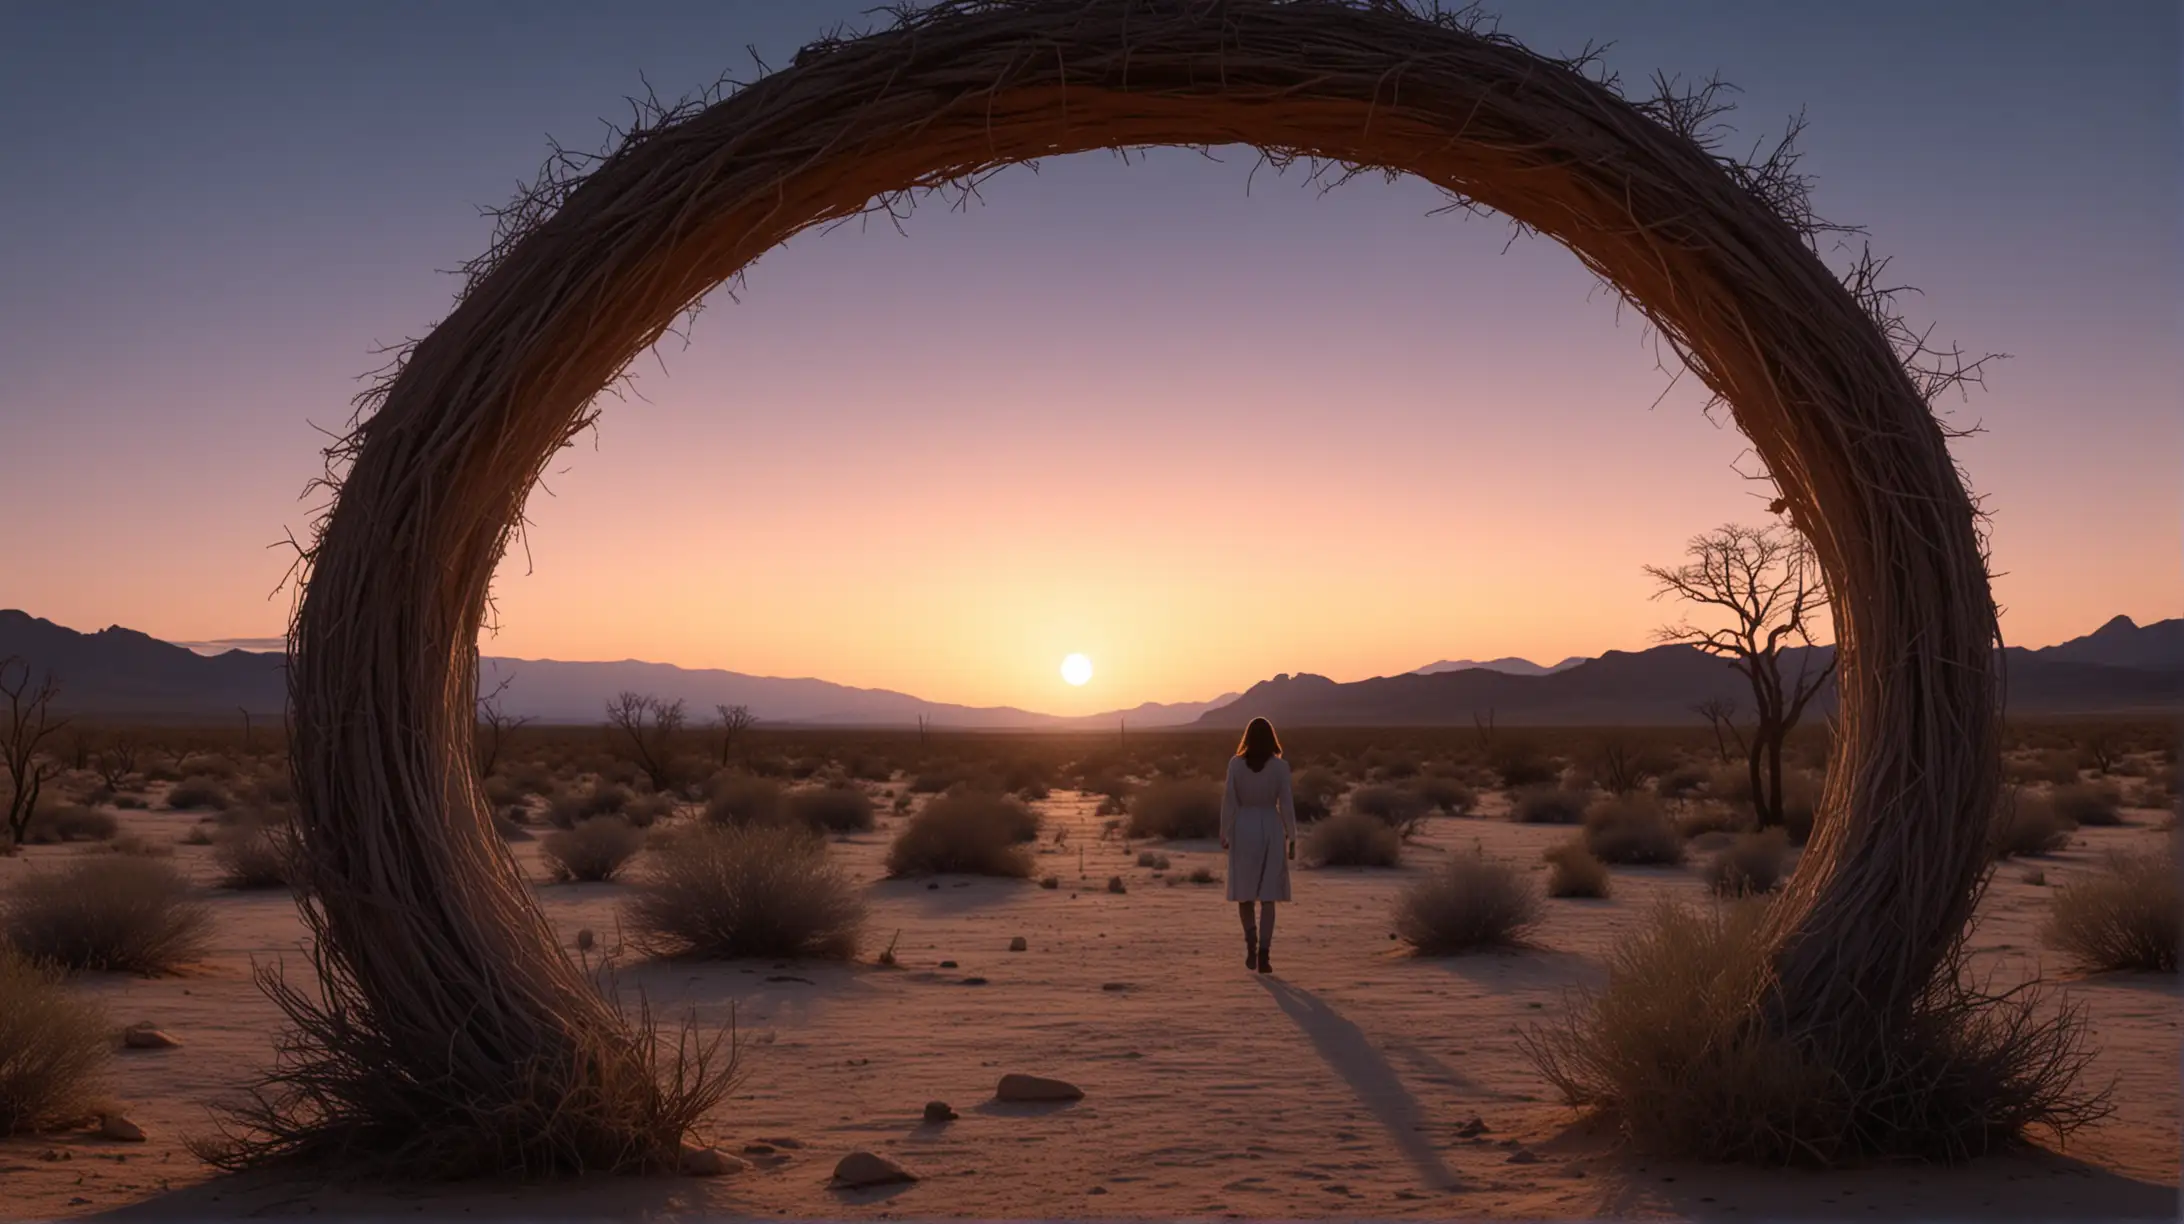 twilight, an arid desert with scarce vegetation, a ghostly woman enters the afterlife through a ring-shaped portal in the horizon.